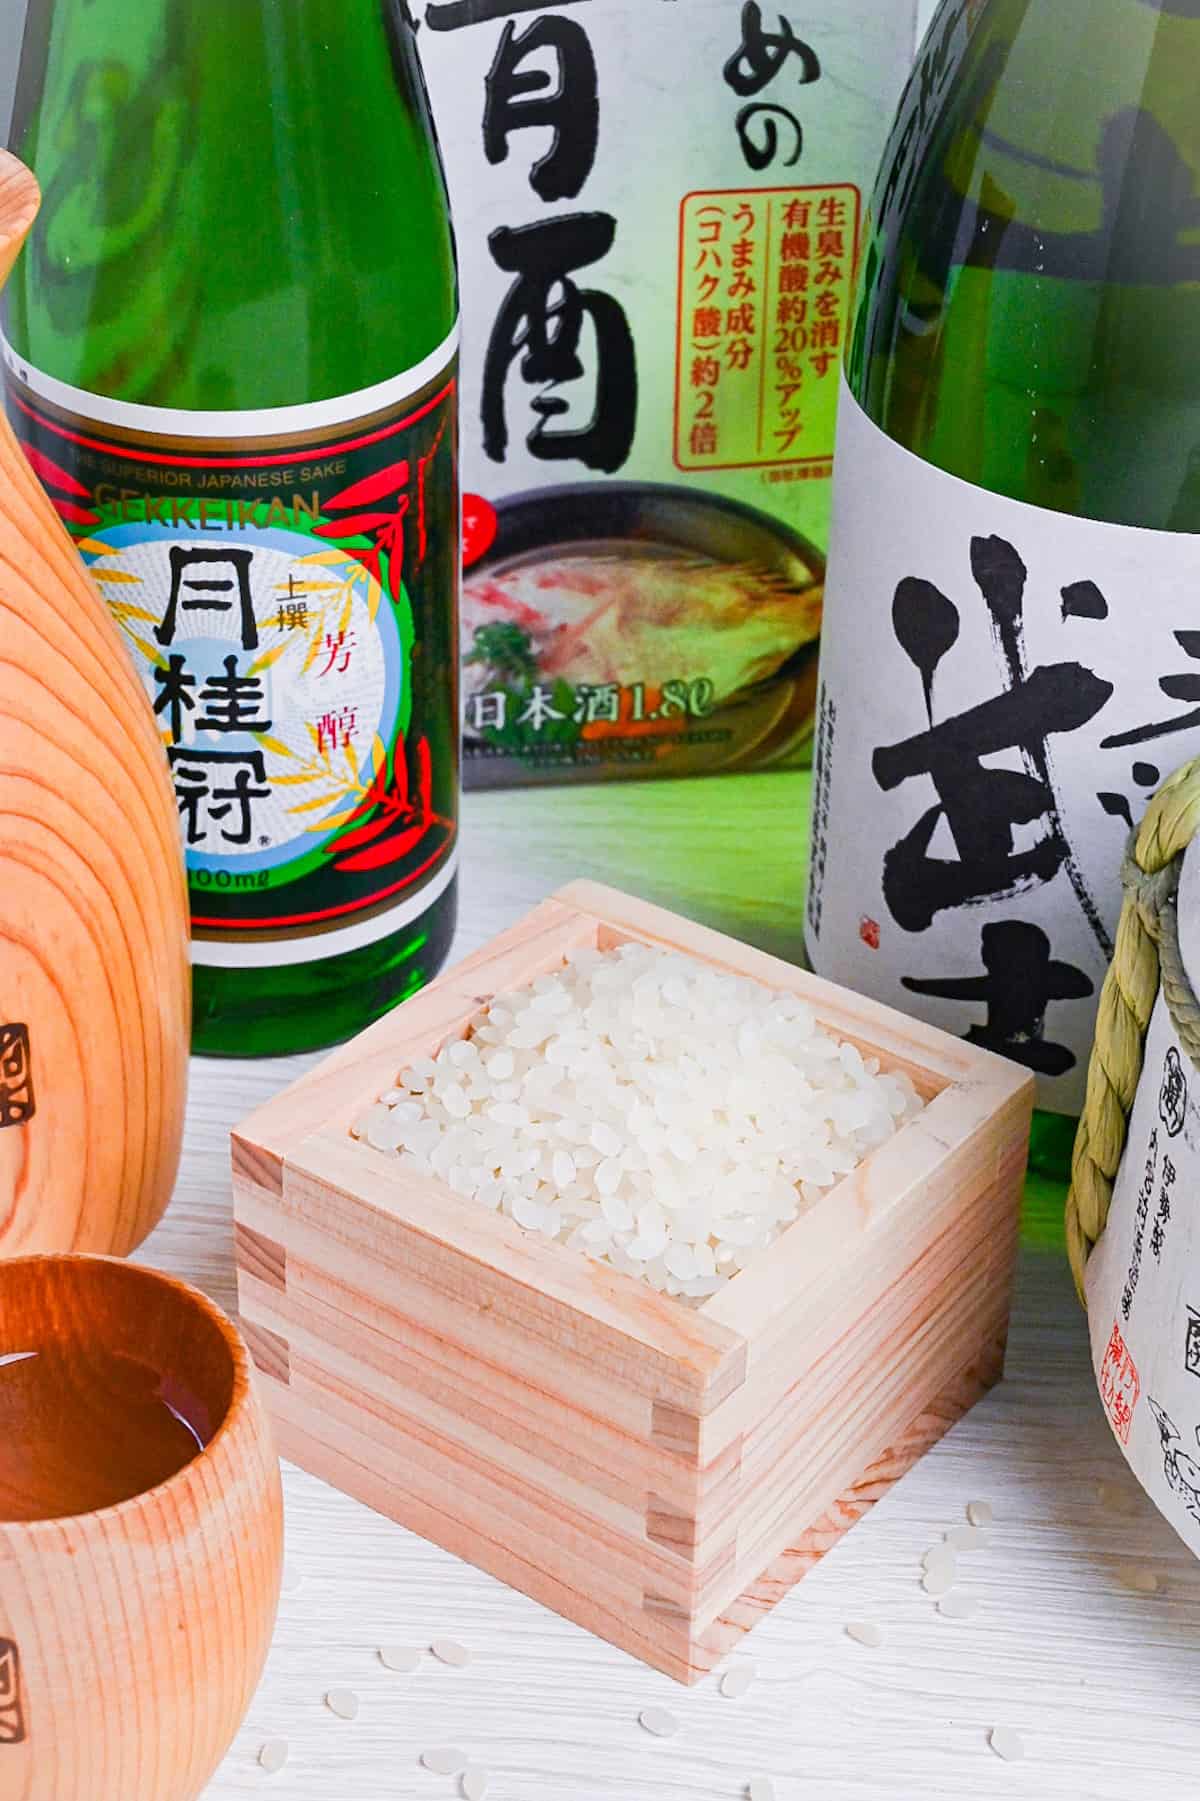 rice in a wooden box surrounded by various bottles of sake